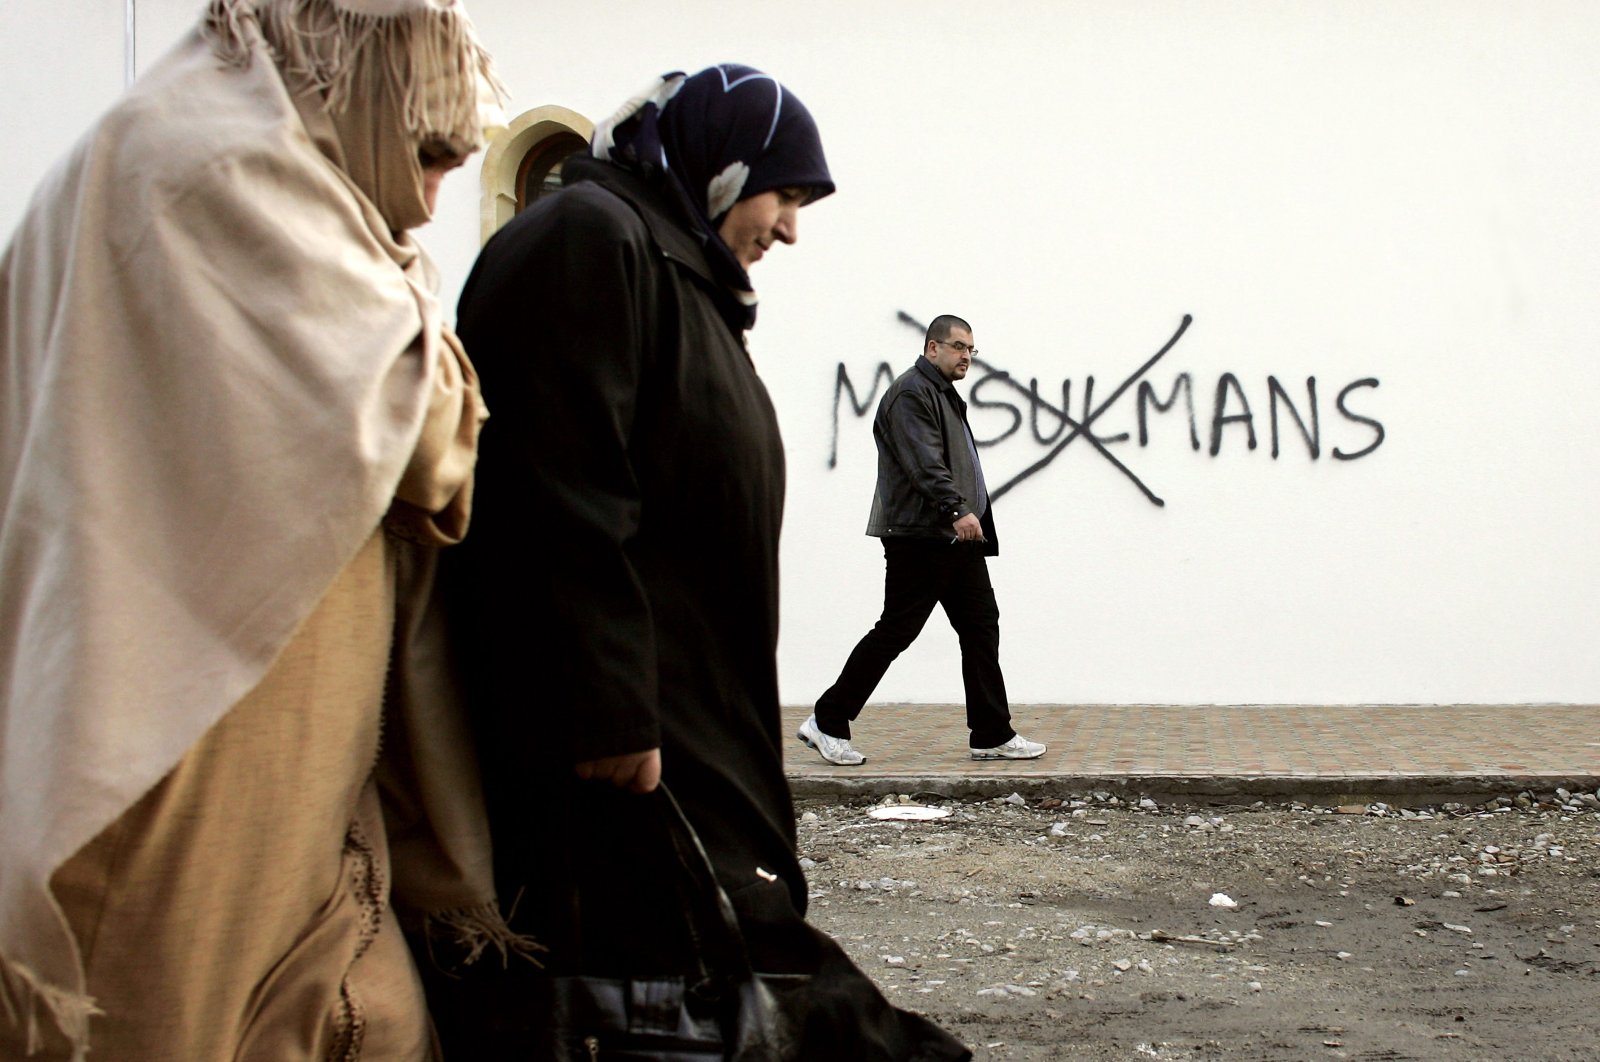 Muslim residents walk past racial slurs painted on the wall of a mosque in the town of Saint-Etienne in central France, Feb. 8, 2010. (AP Photo)